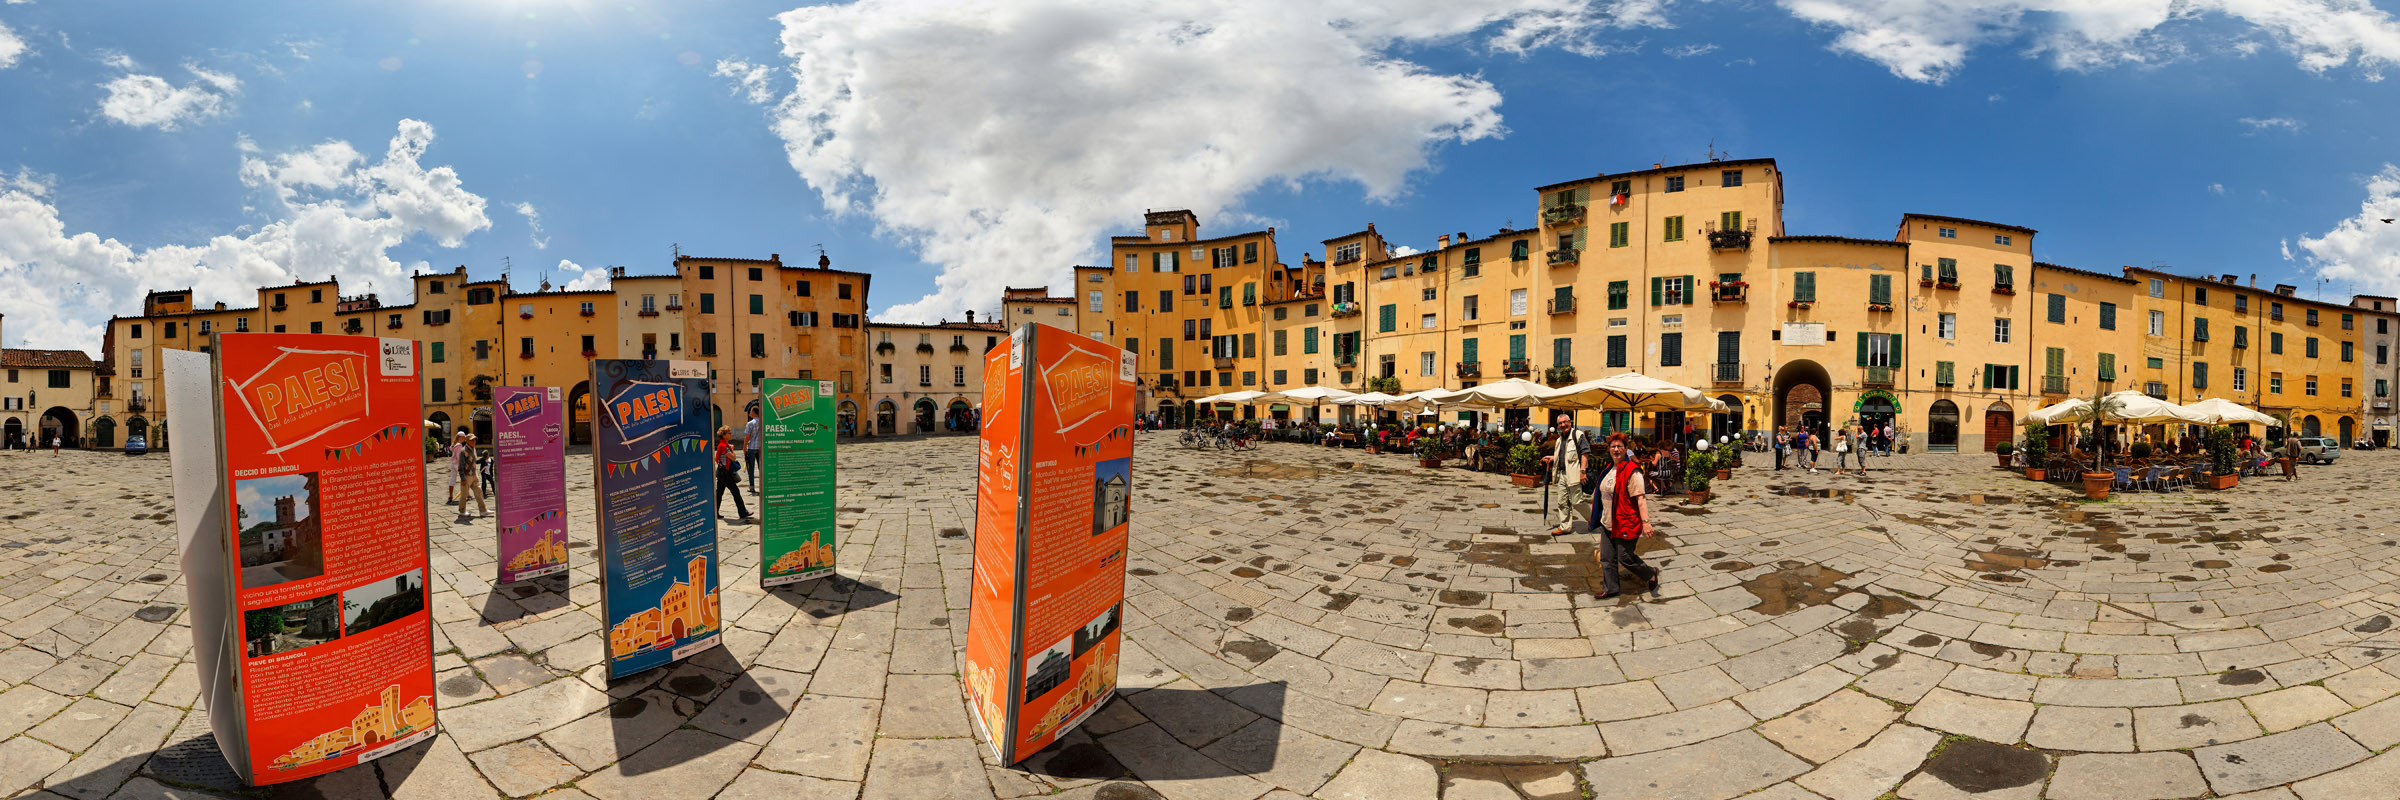 2009_06_PANOS IMG_0522 ITALY_Lucca PANO Piazza Anfiteatro.jpg